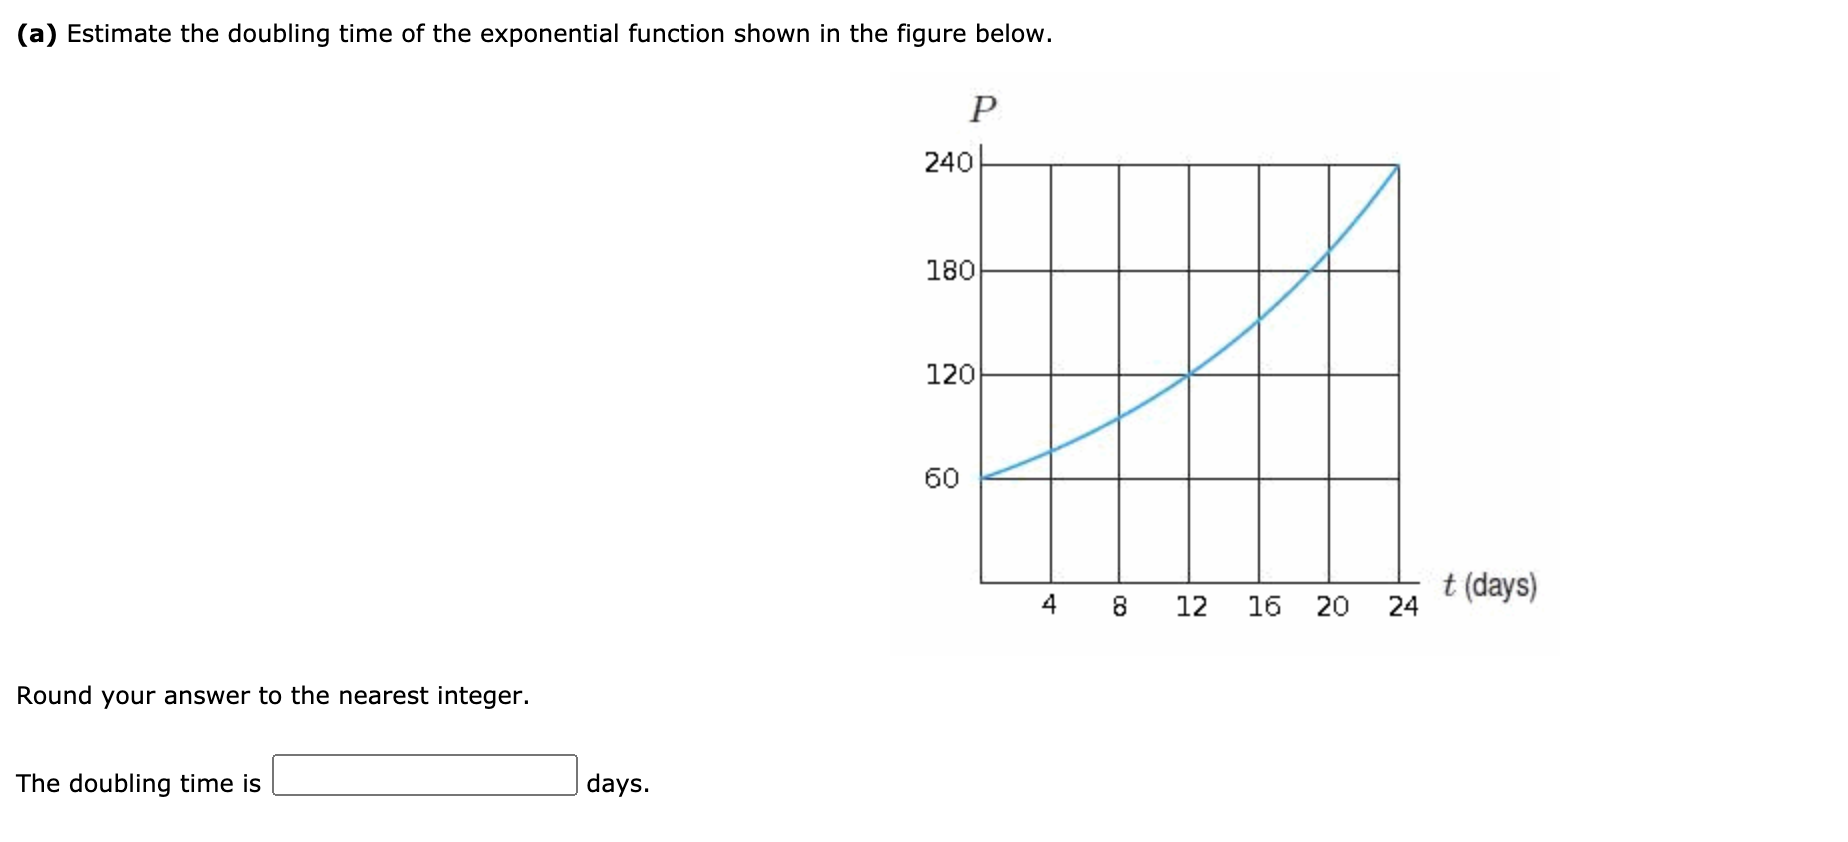 (a) Estimate the doubling time of the exponential function shown in the figure below.
P
240
180
120
60
12 16 20
t (days)
24
4 8
Round your answer to the nearest integer.
The doubling time is
days.
